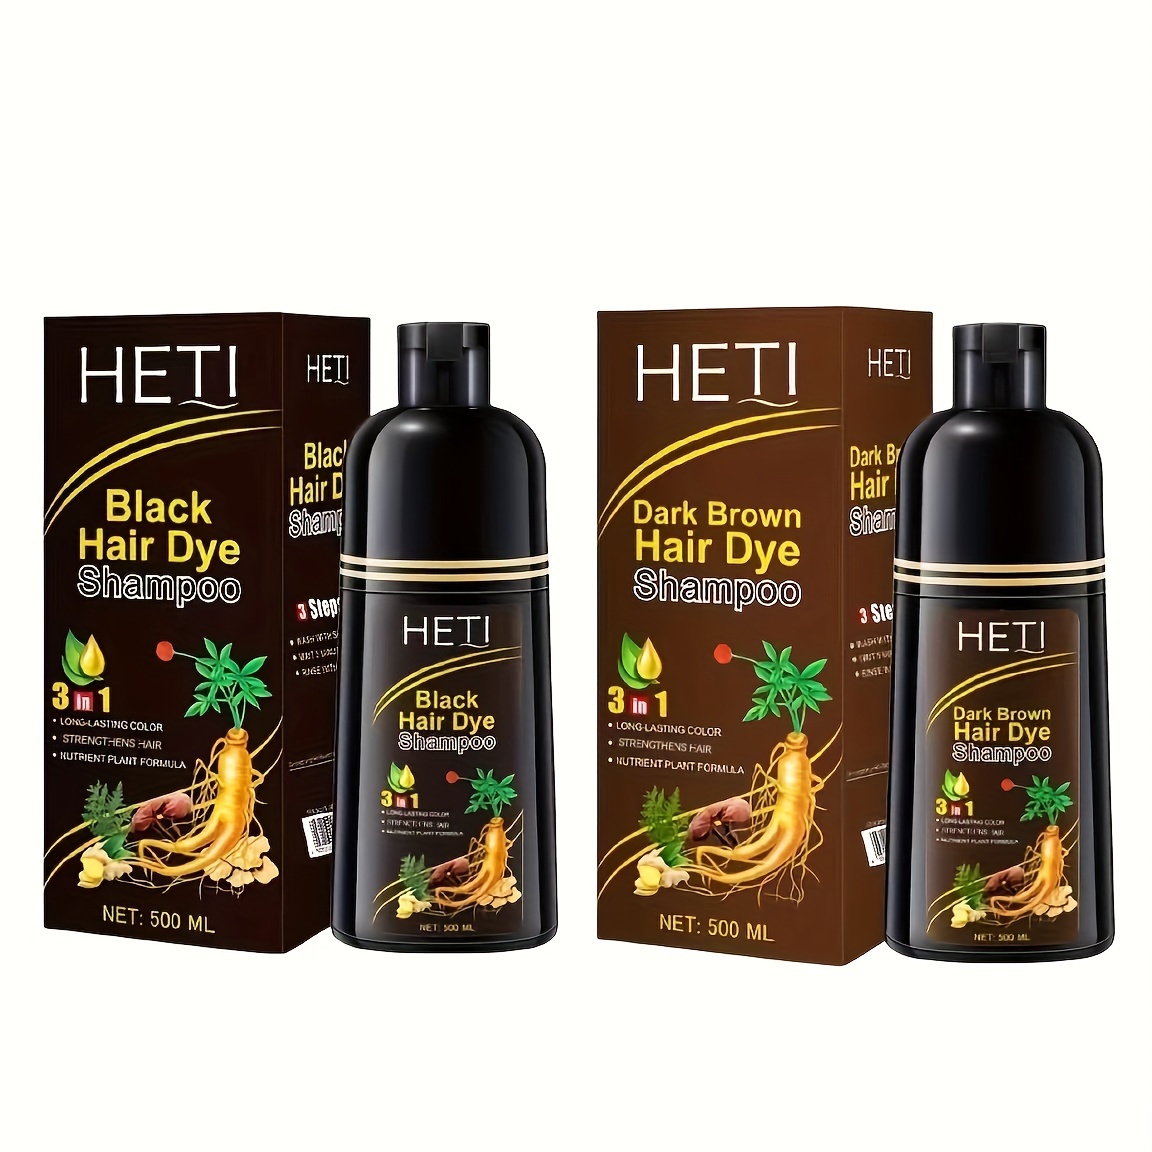 

500ml Hair Dye Shampoo, Ginseng Plant Hair Color Shampoo, Easy To Color And Convenient